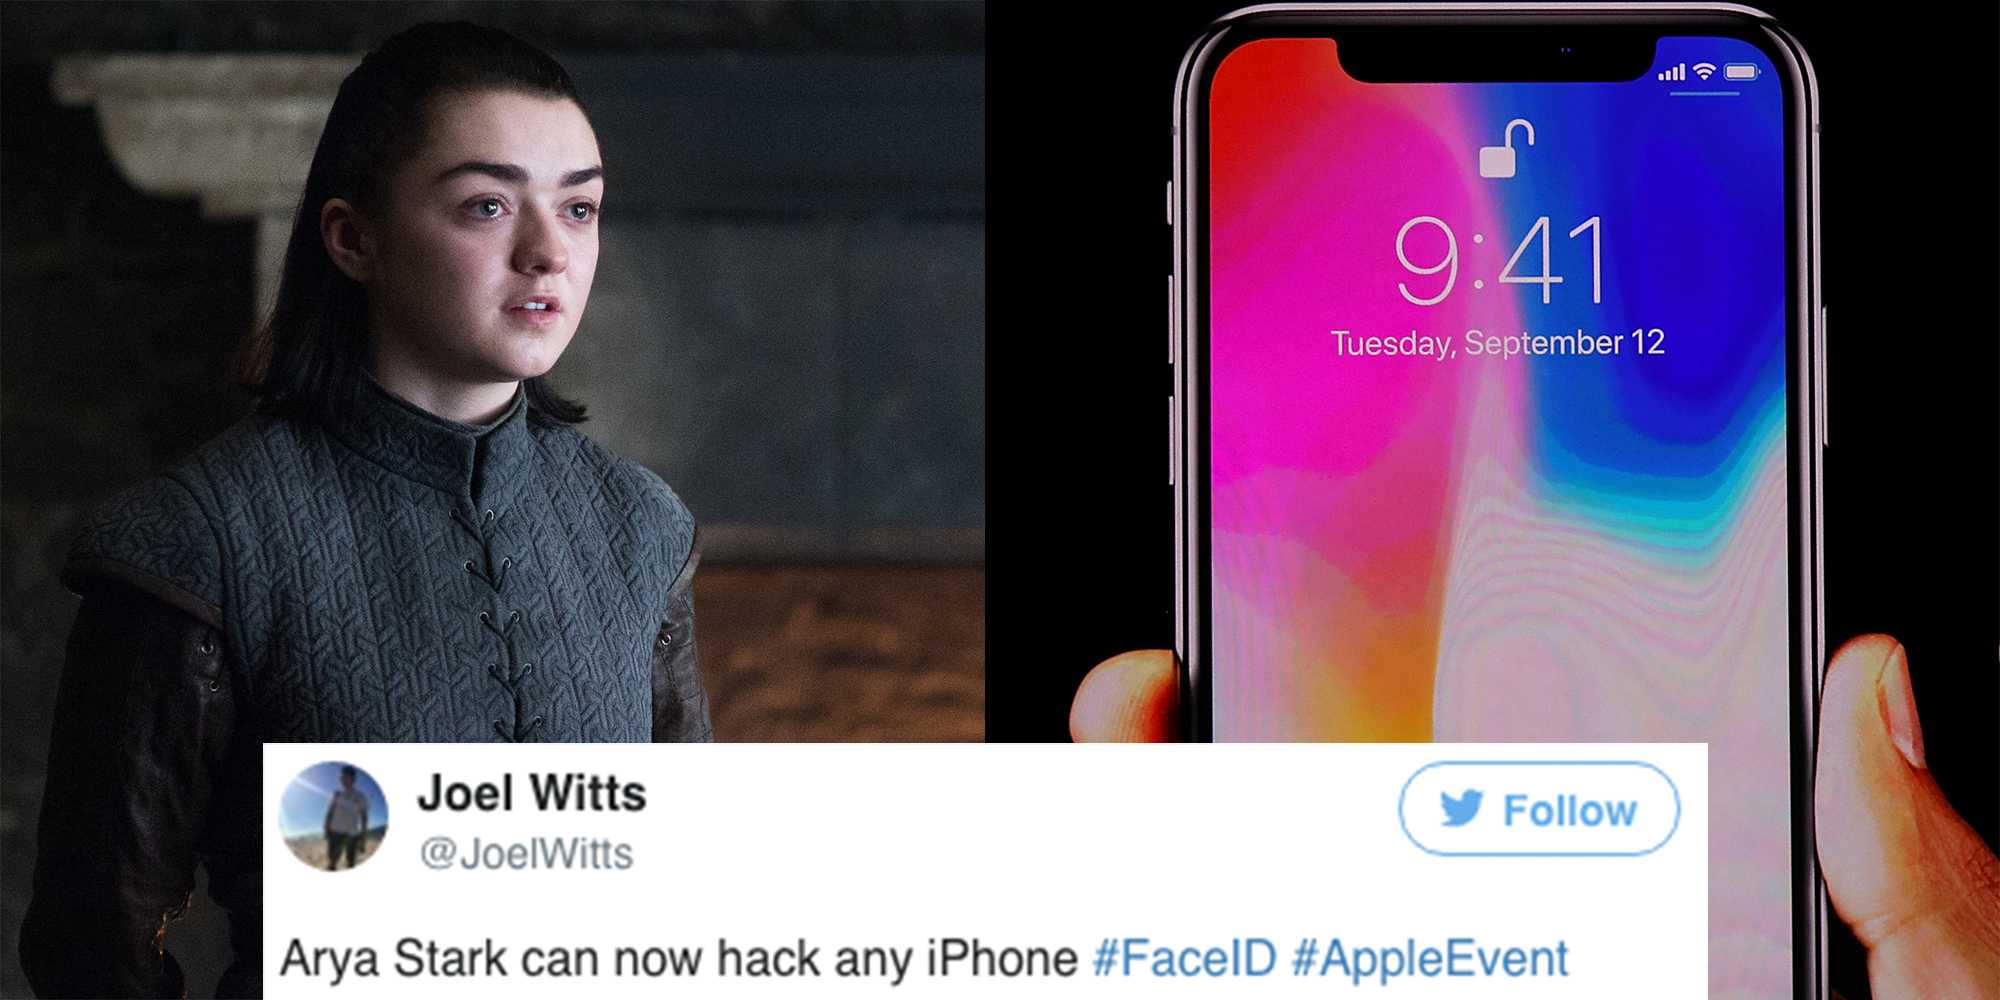 Game of Thrones Fans Are Trolling the iPhone X with Arya Stark Memes